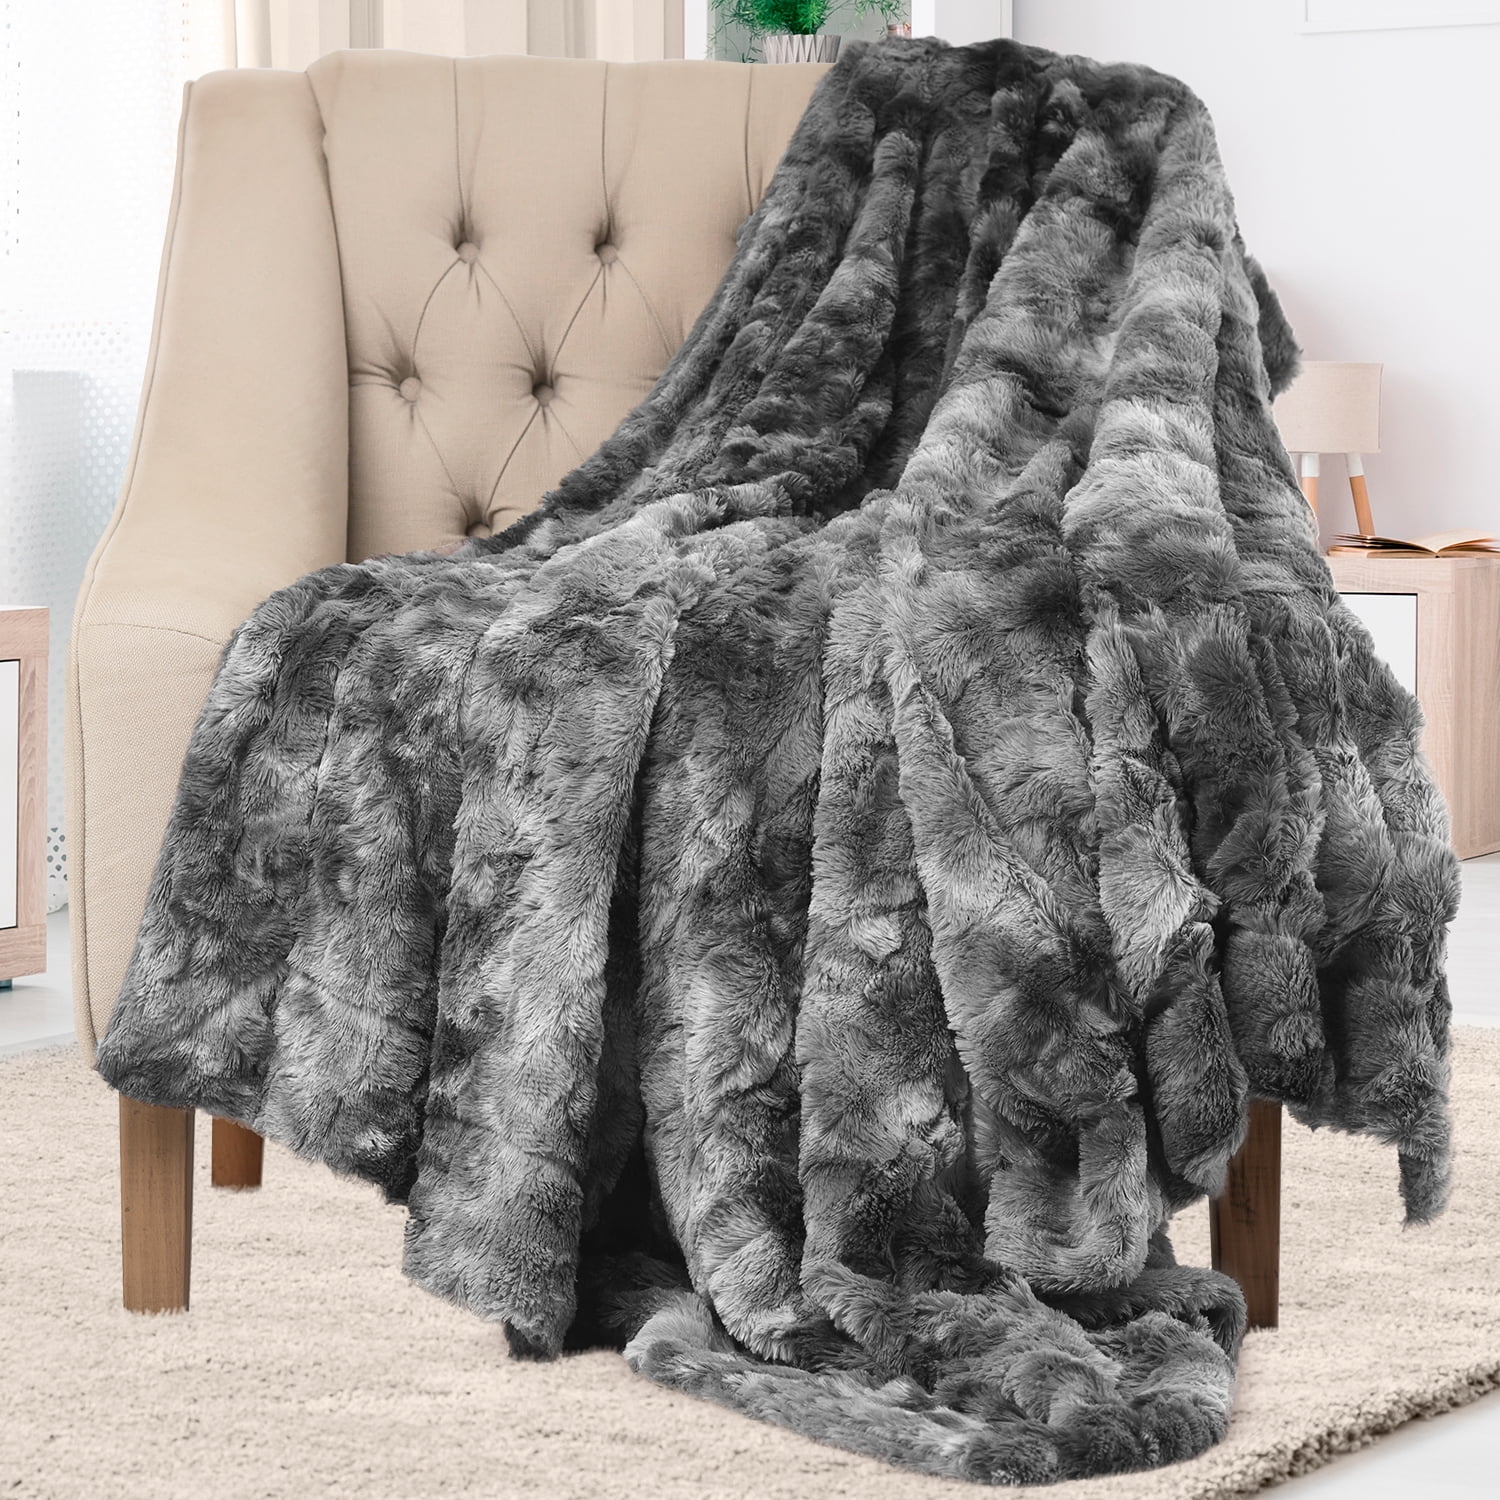 Large Soft Blanket Throws 9 Colors Faux Fur Hypoallergenic Plush Throw Blanket 